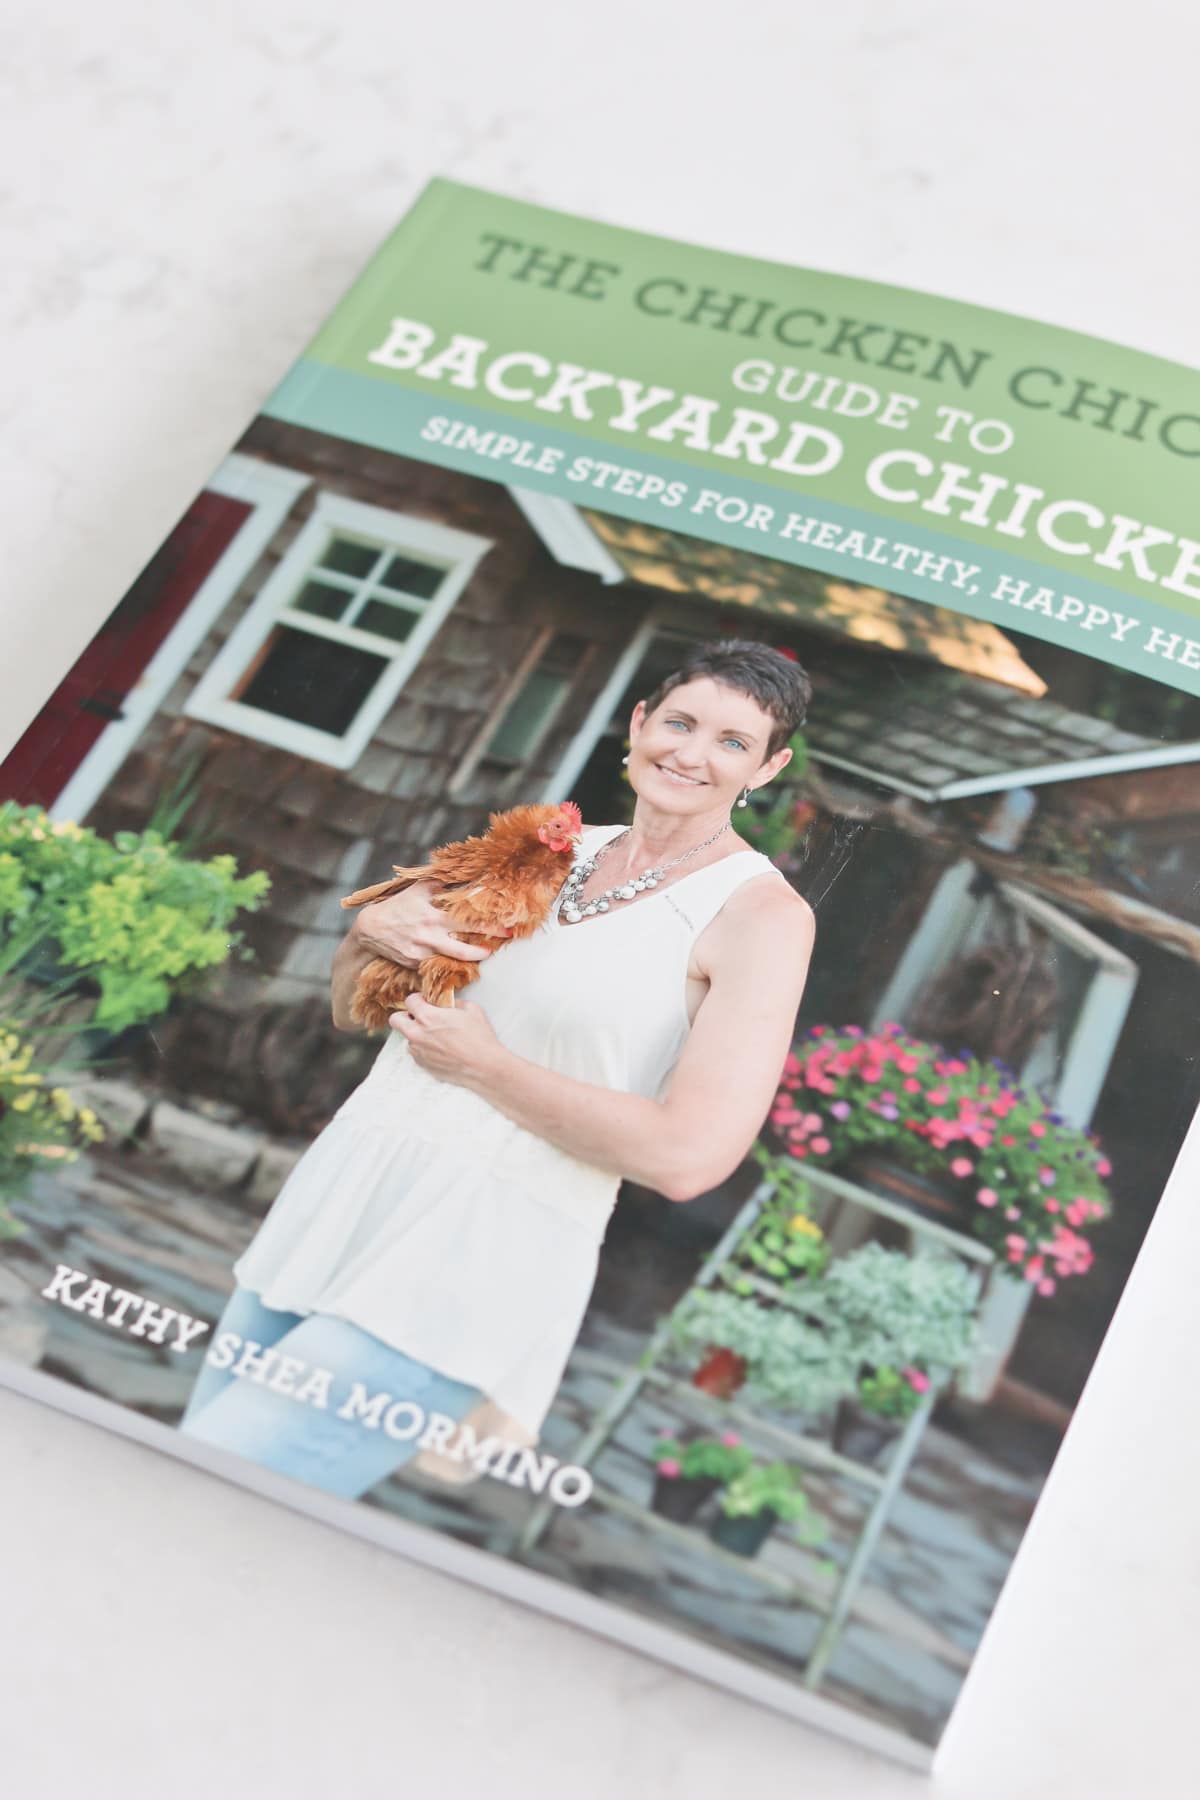 Guide to Raising Chickens book review